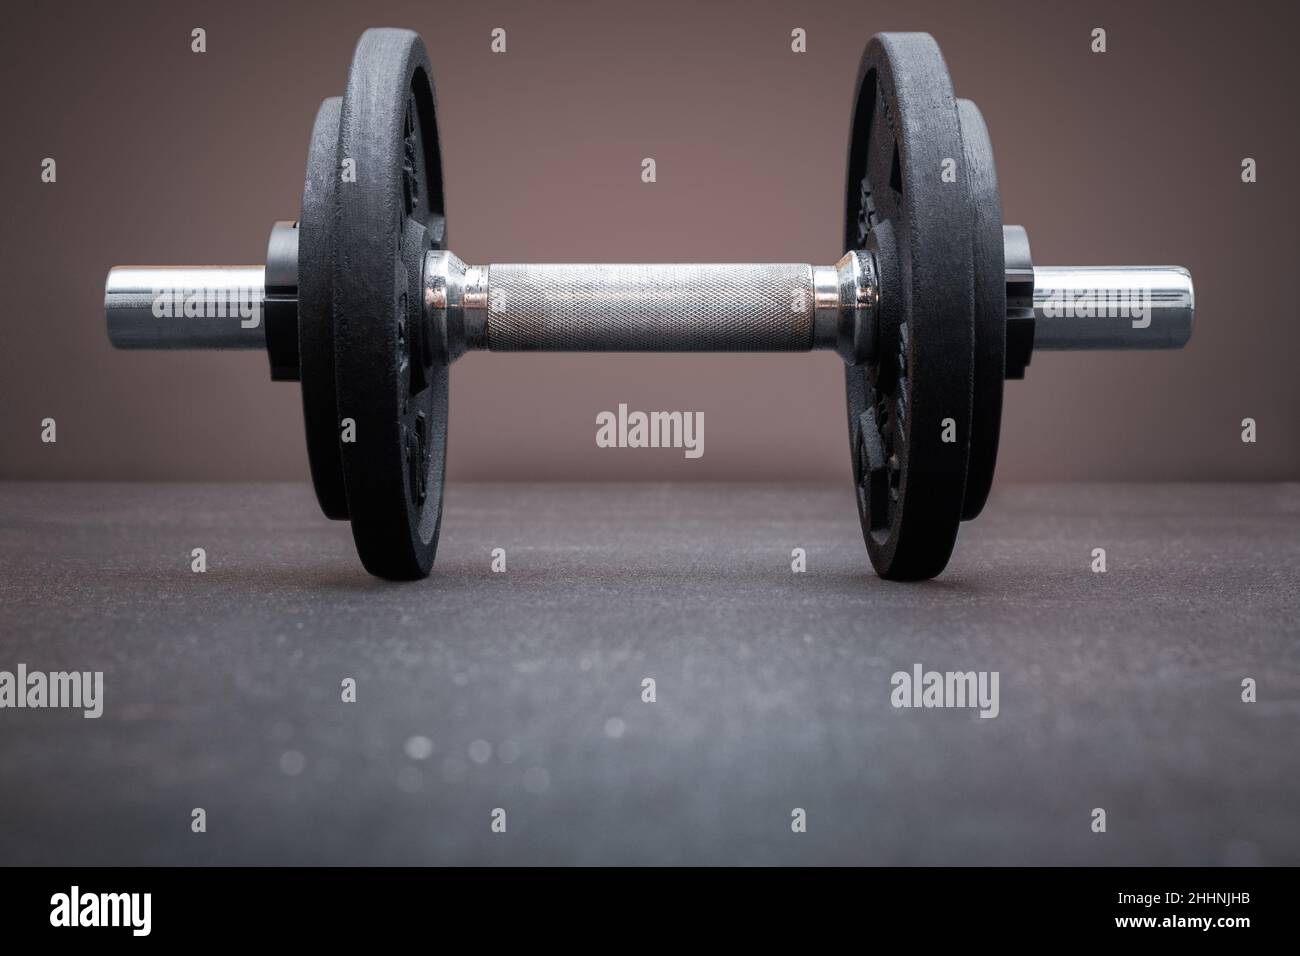 A dumbbell bar loaded with weight plates on the floor at the gym. Bodybuilding equipment on a clean background with empty space for text Stock Photo